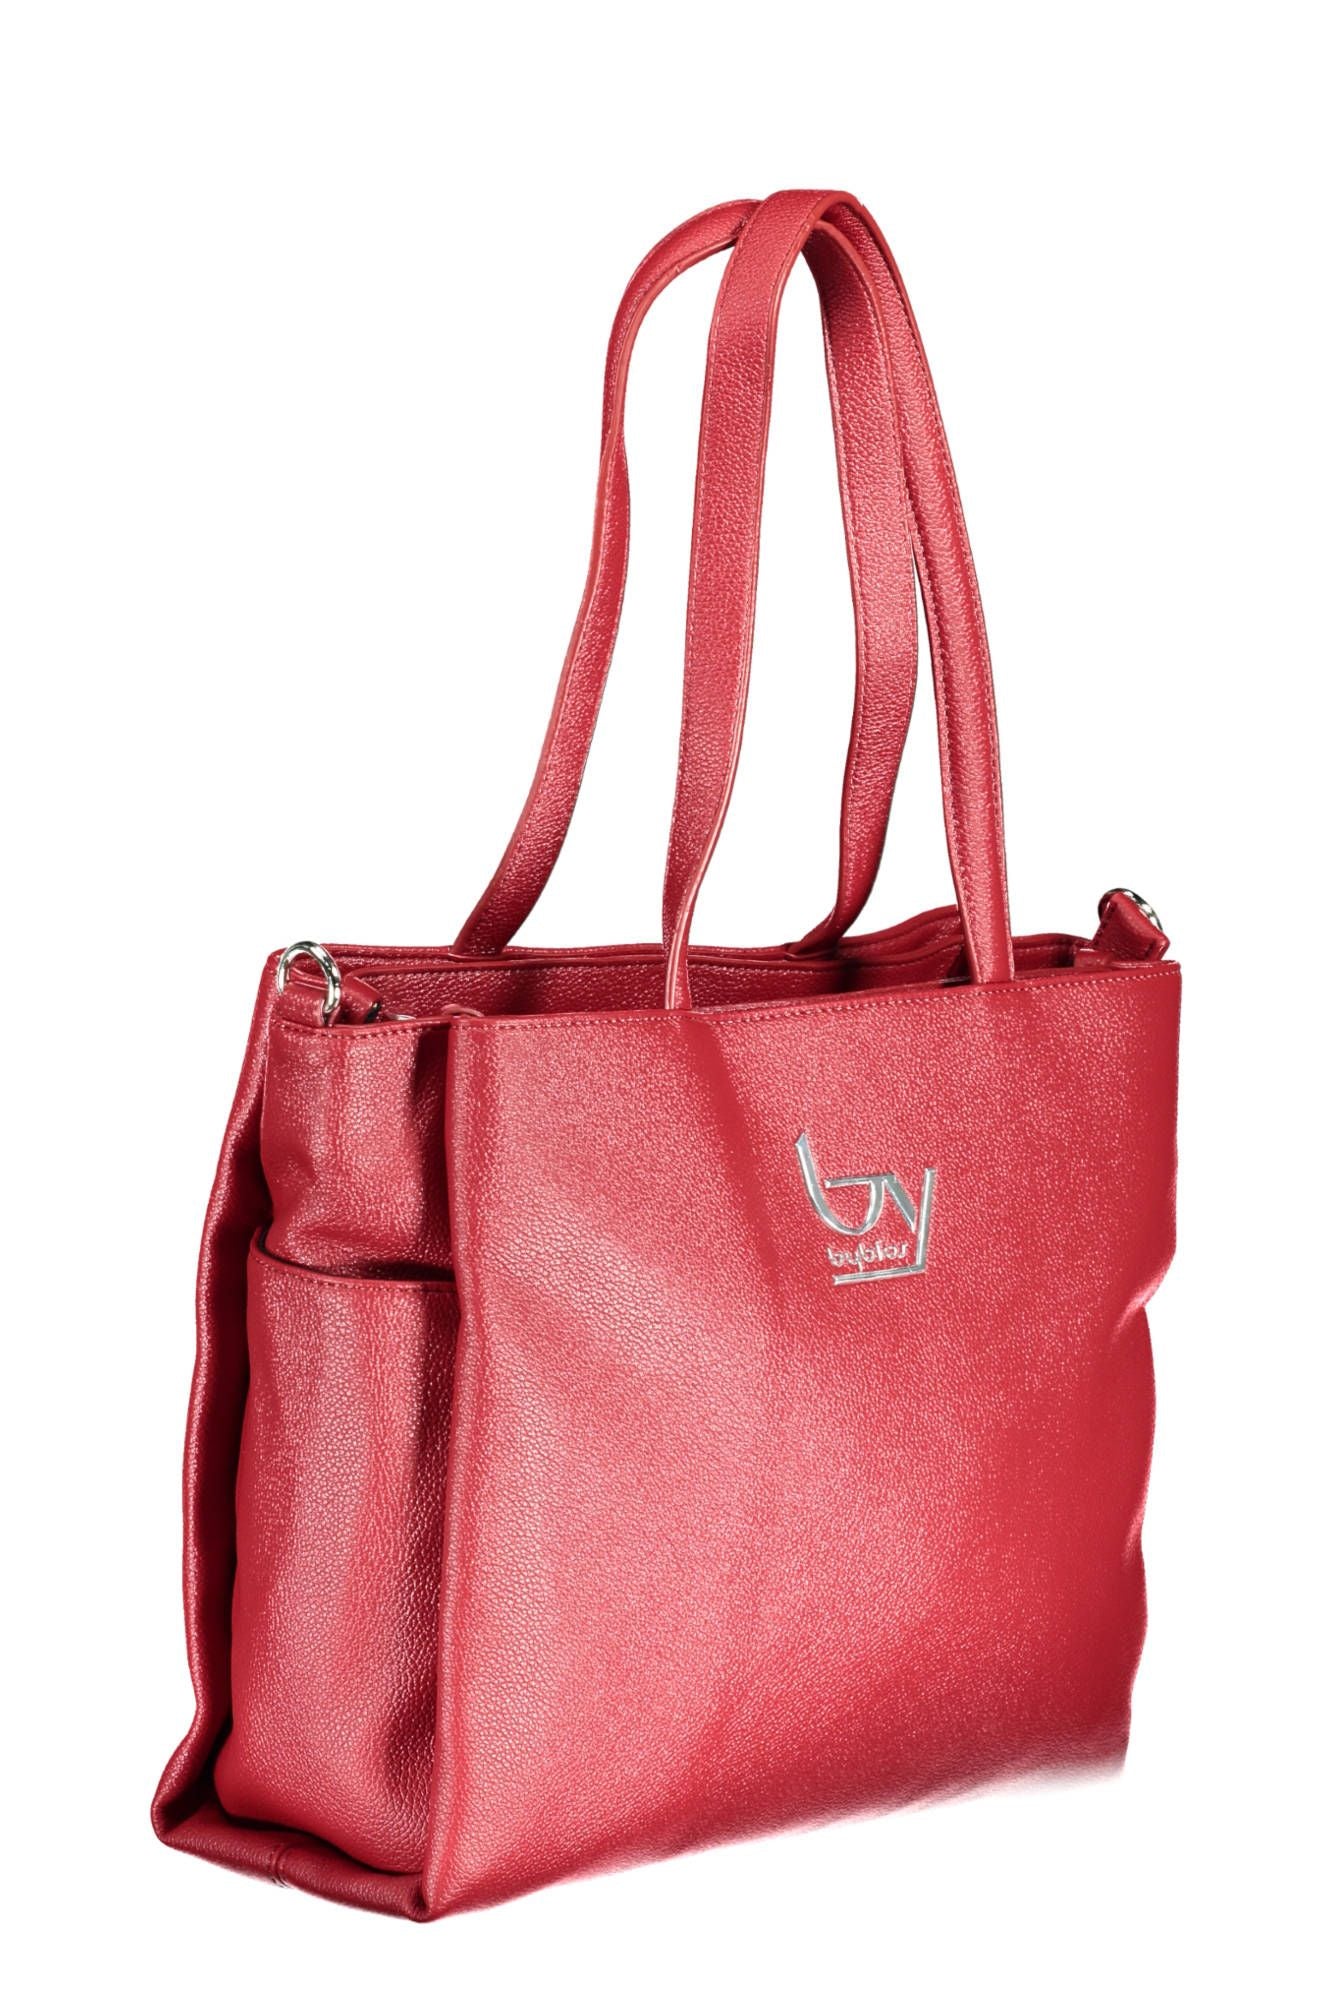 Chic Red Convertible Shoulder Bag